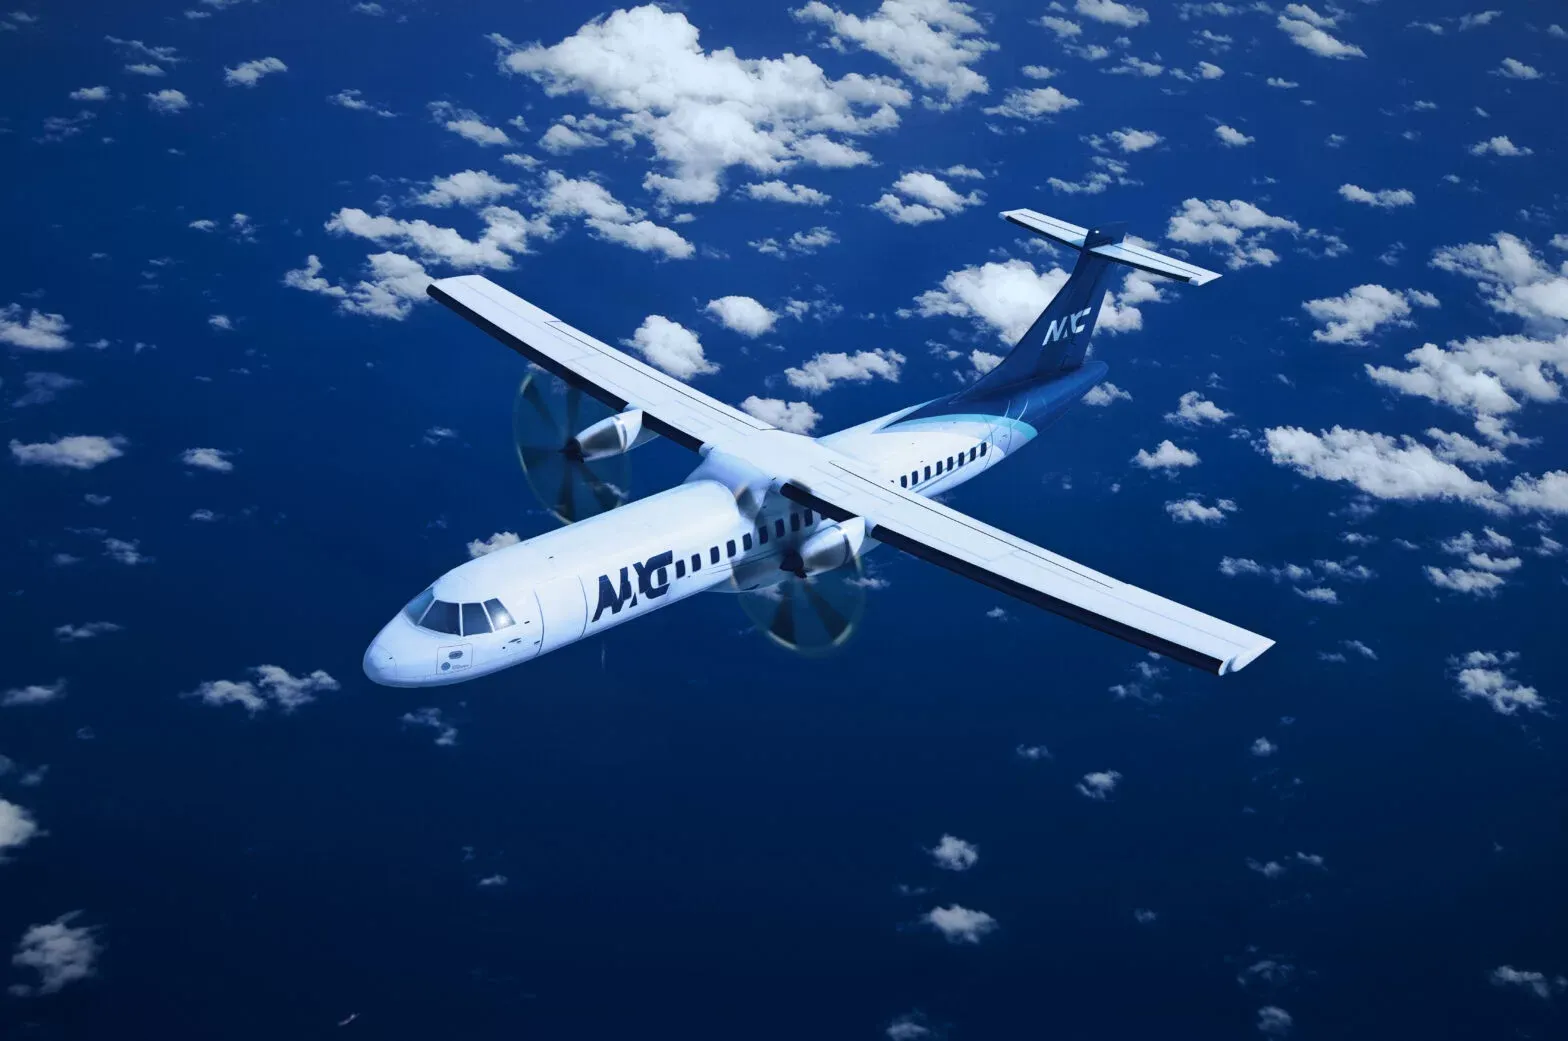 NAC has completed a sales agreement for one ATR 42-500 with Skyways Technics